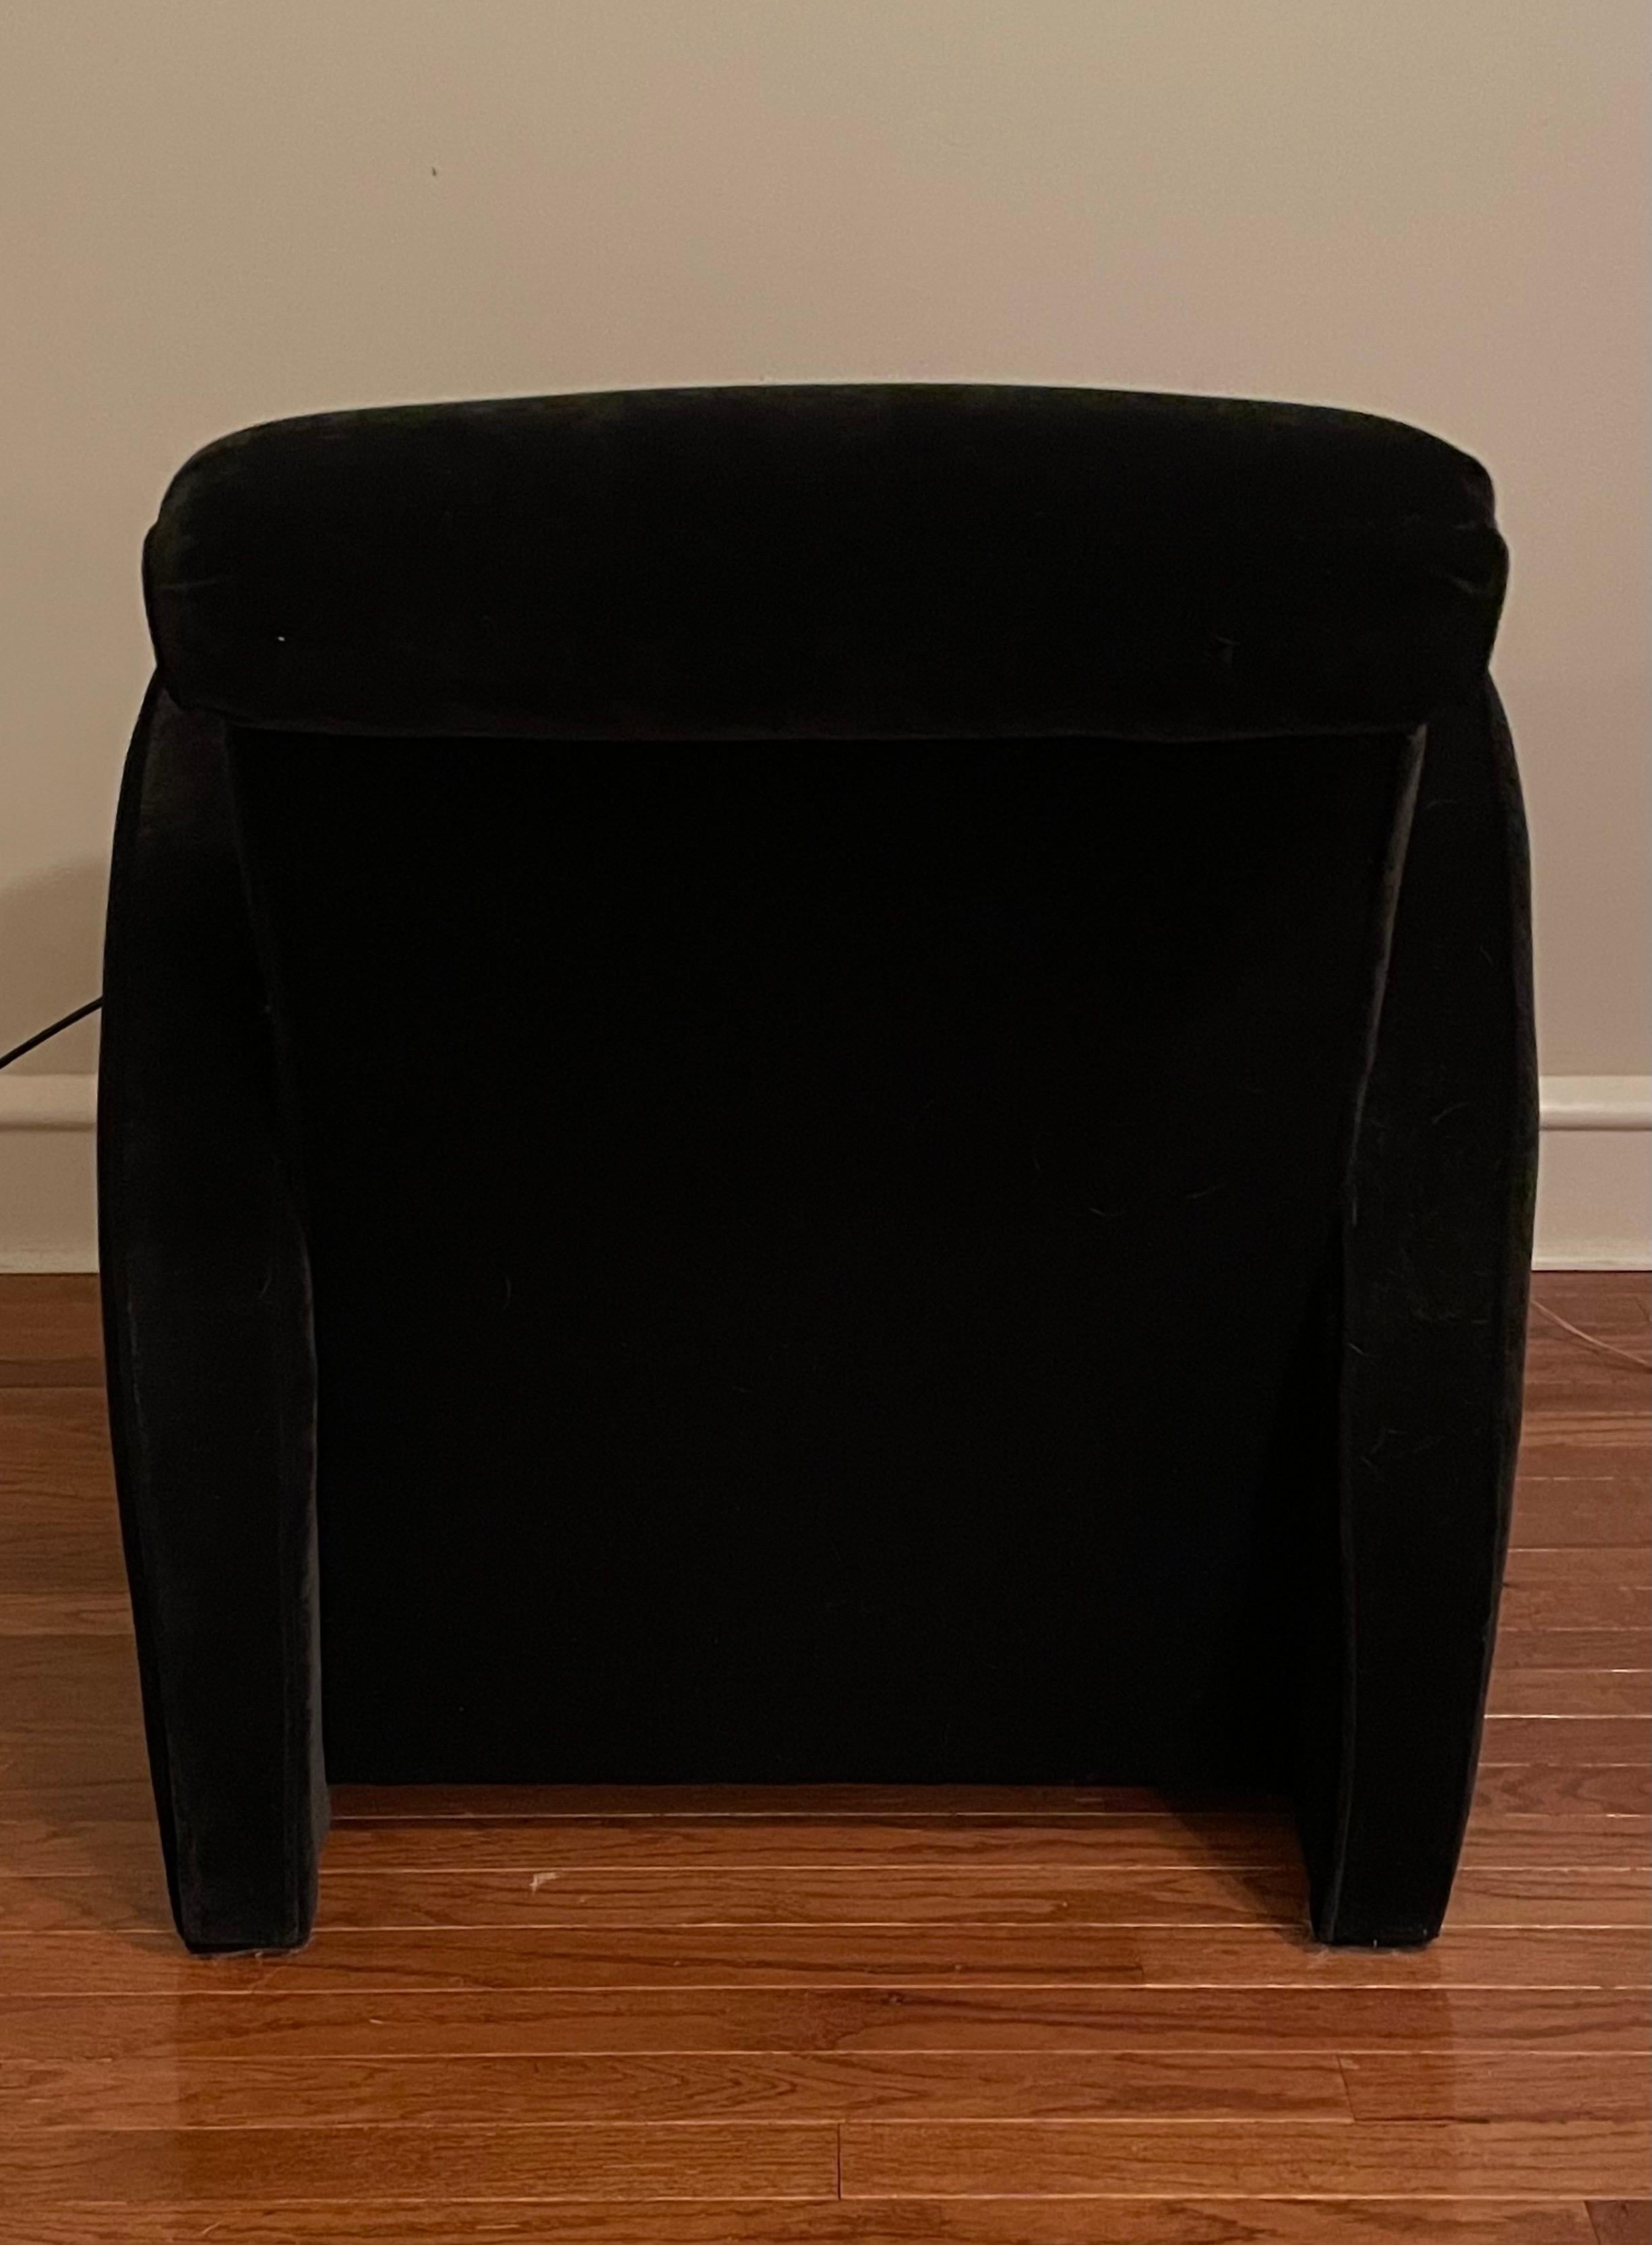 Vintage Sculptural Art Deco Club Lounge Chair in Black Velvet In Good Condition For Sale In West Reading, PA